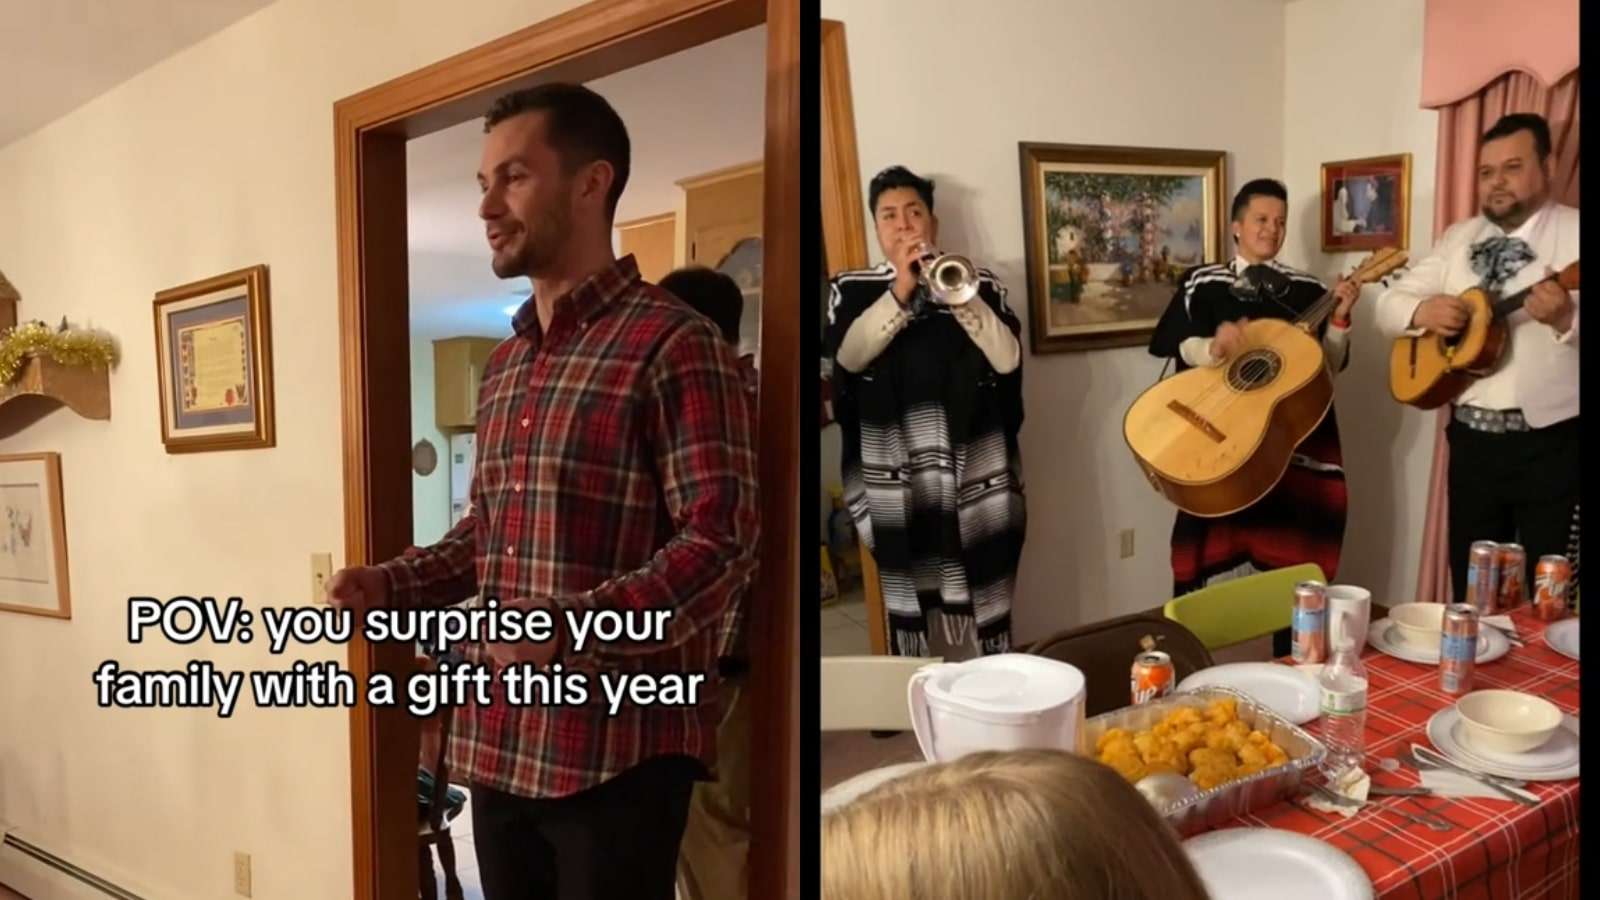 Man gives his family the gift of mariachi music